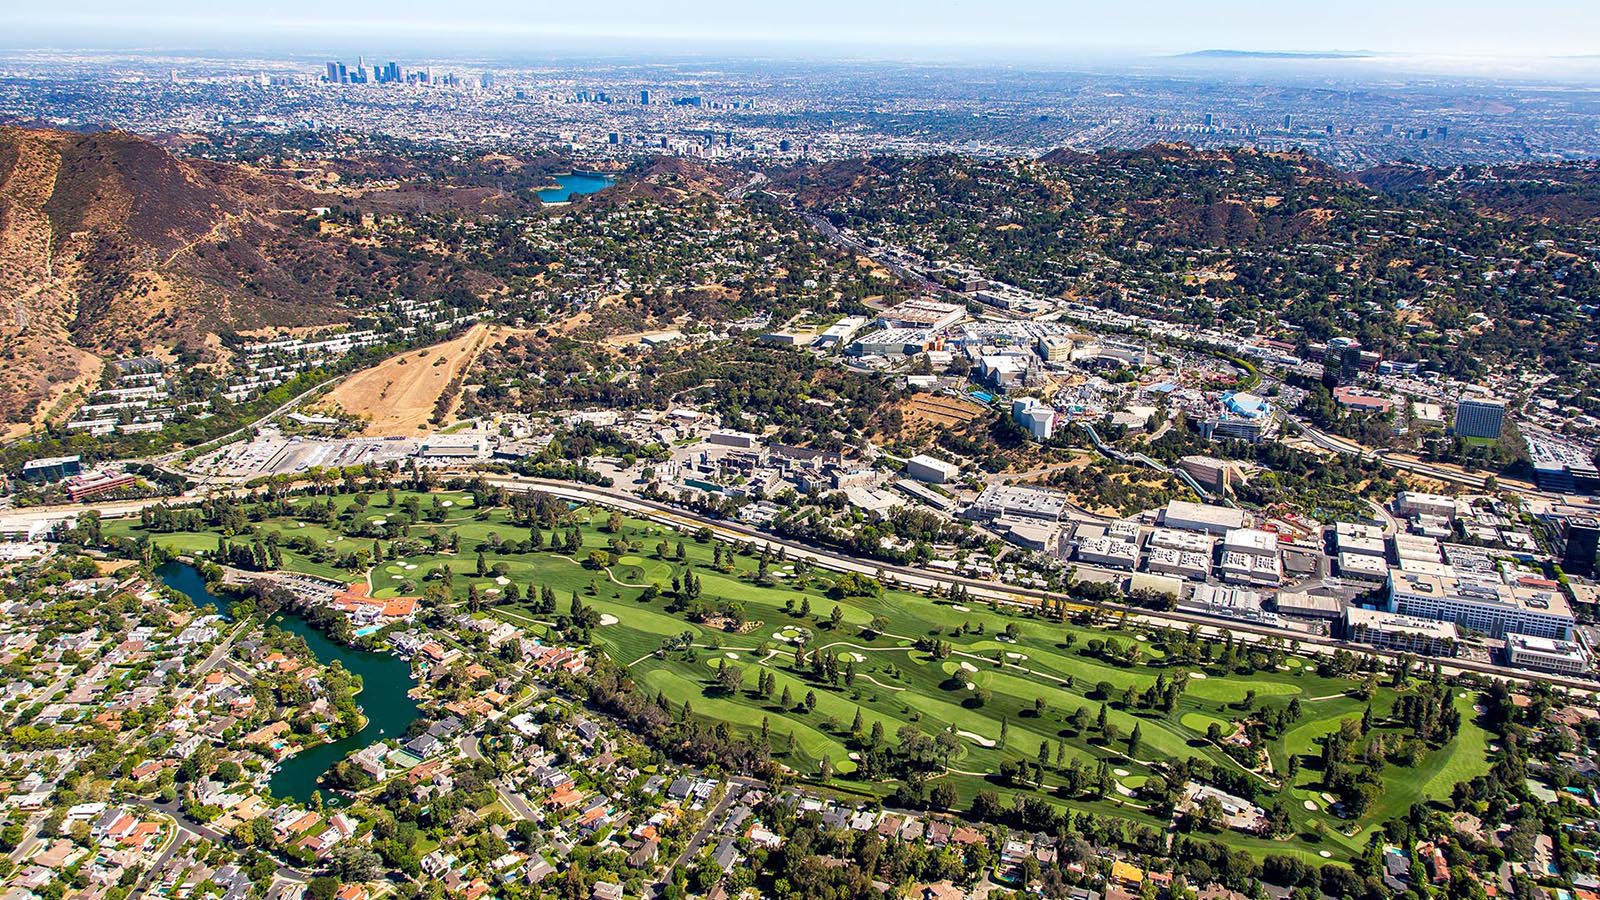 Sports photo of Lakeside Golf Club in Toluca Lake with Downtown Los Angeles and Santa Catalina Island in the background